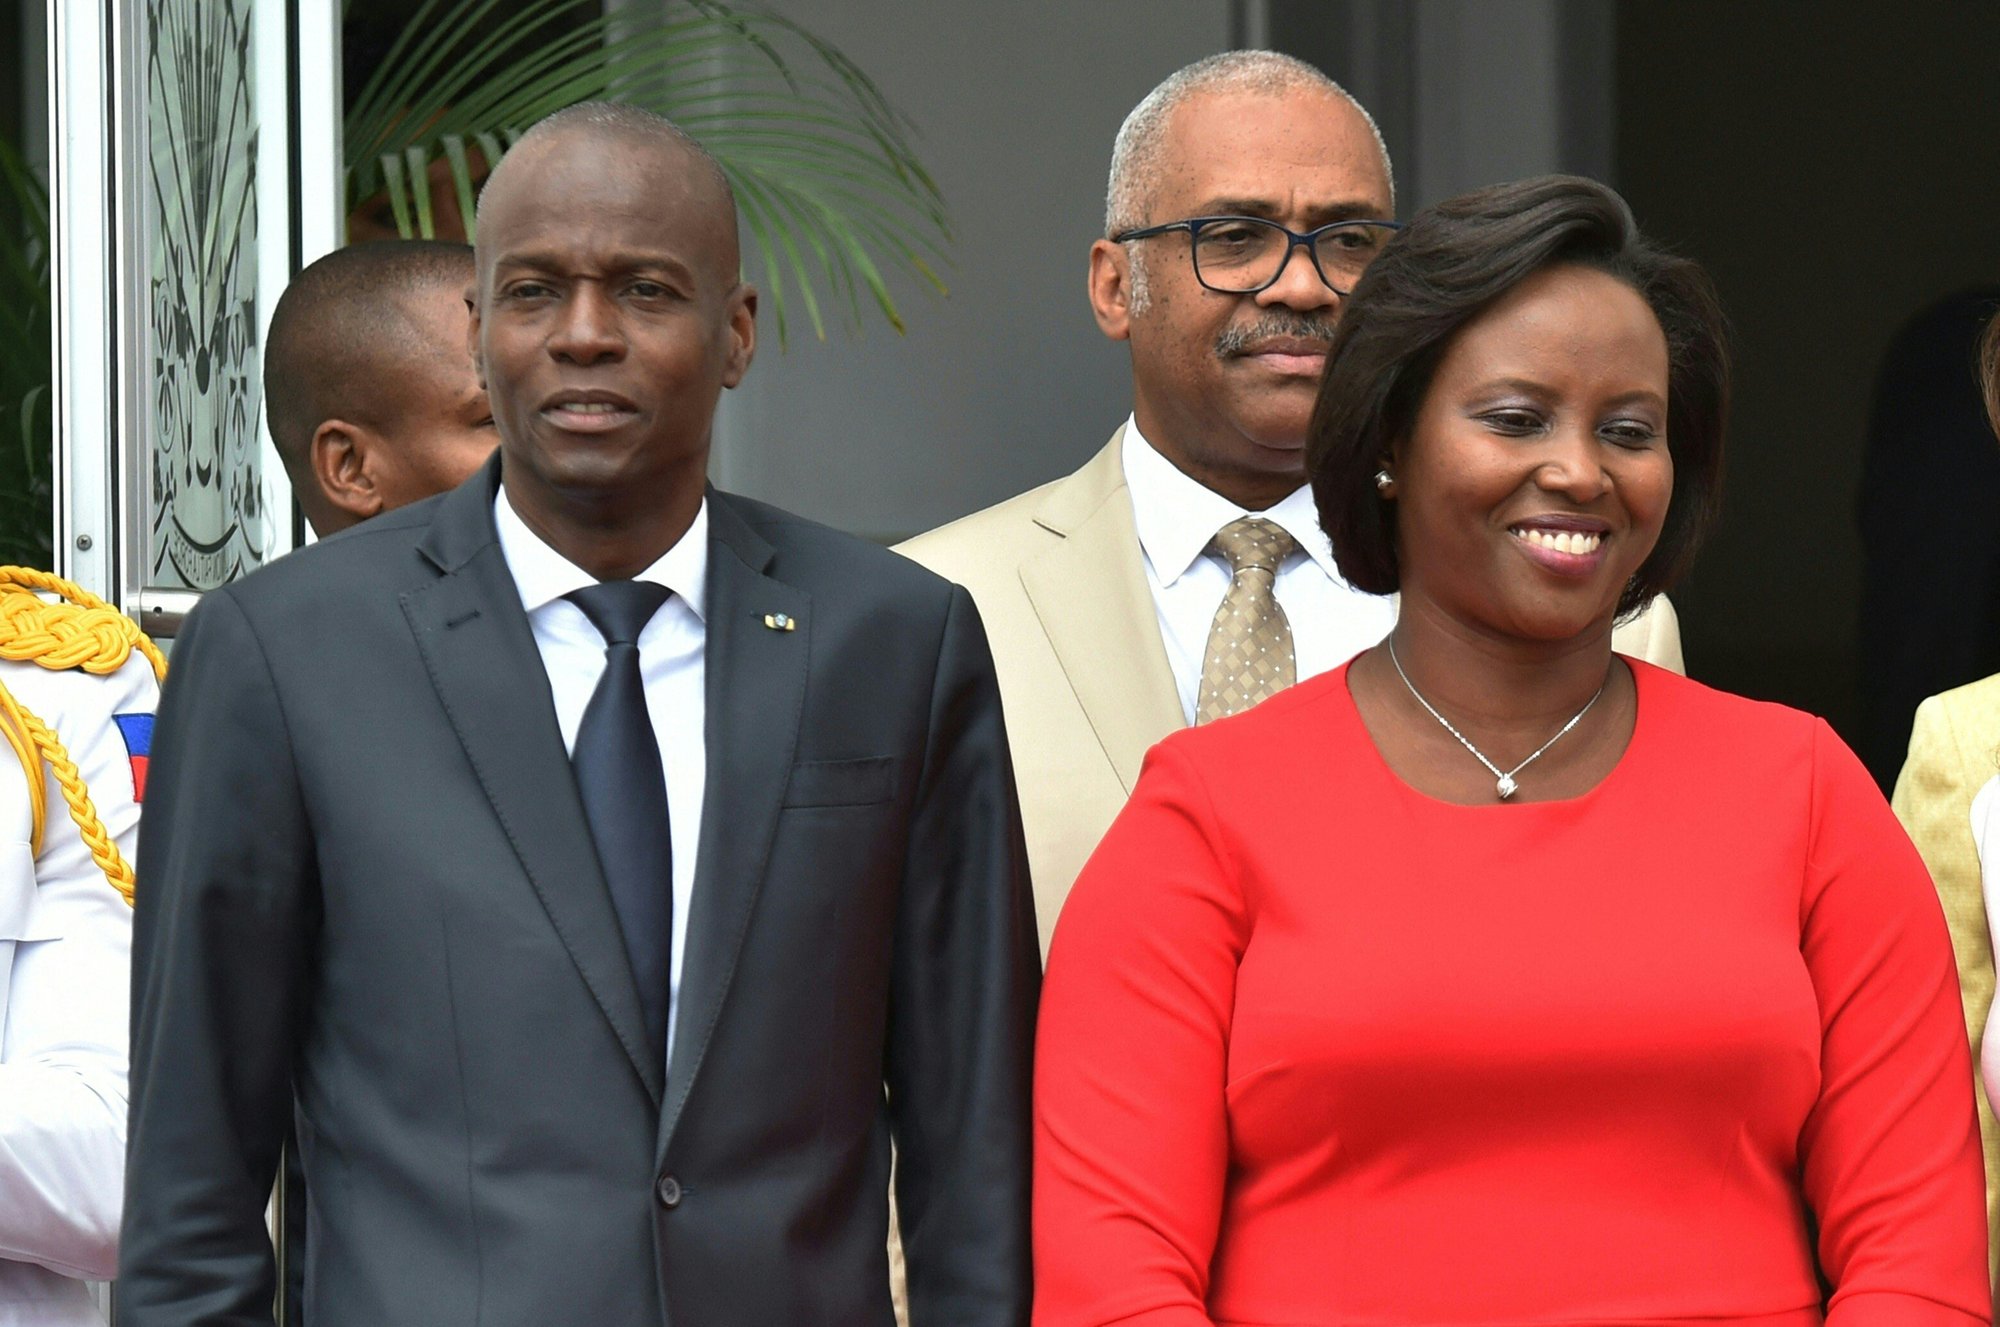 His widow said the mercenaries finished with the Haitian president within seconds